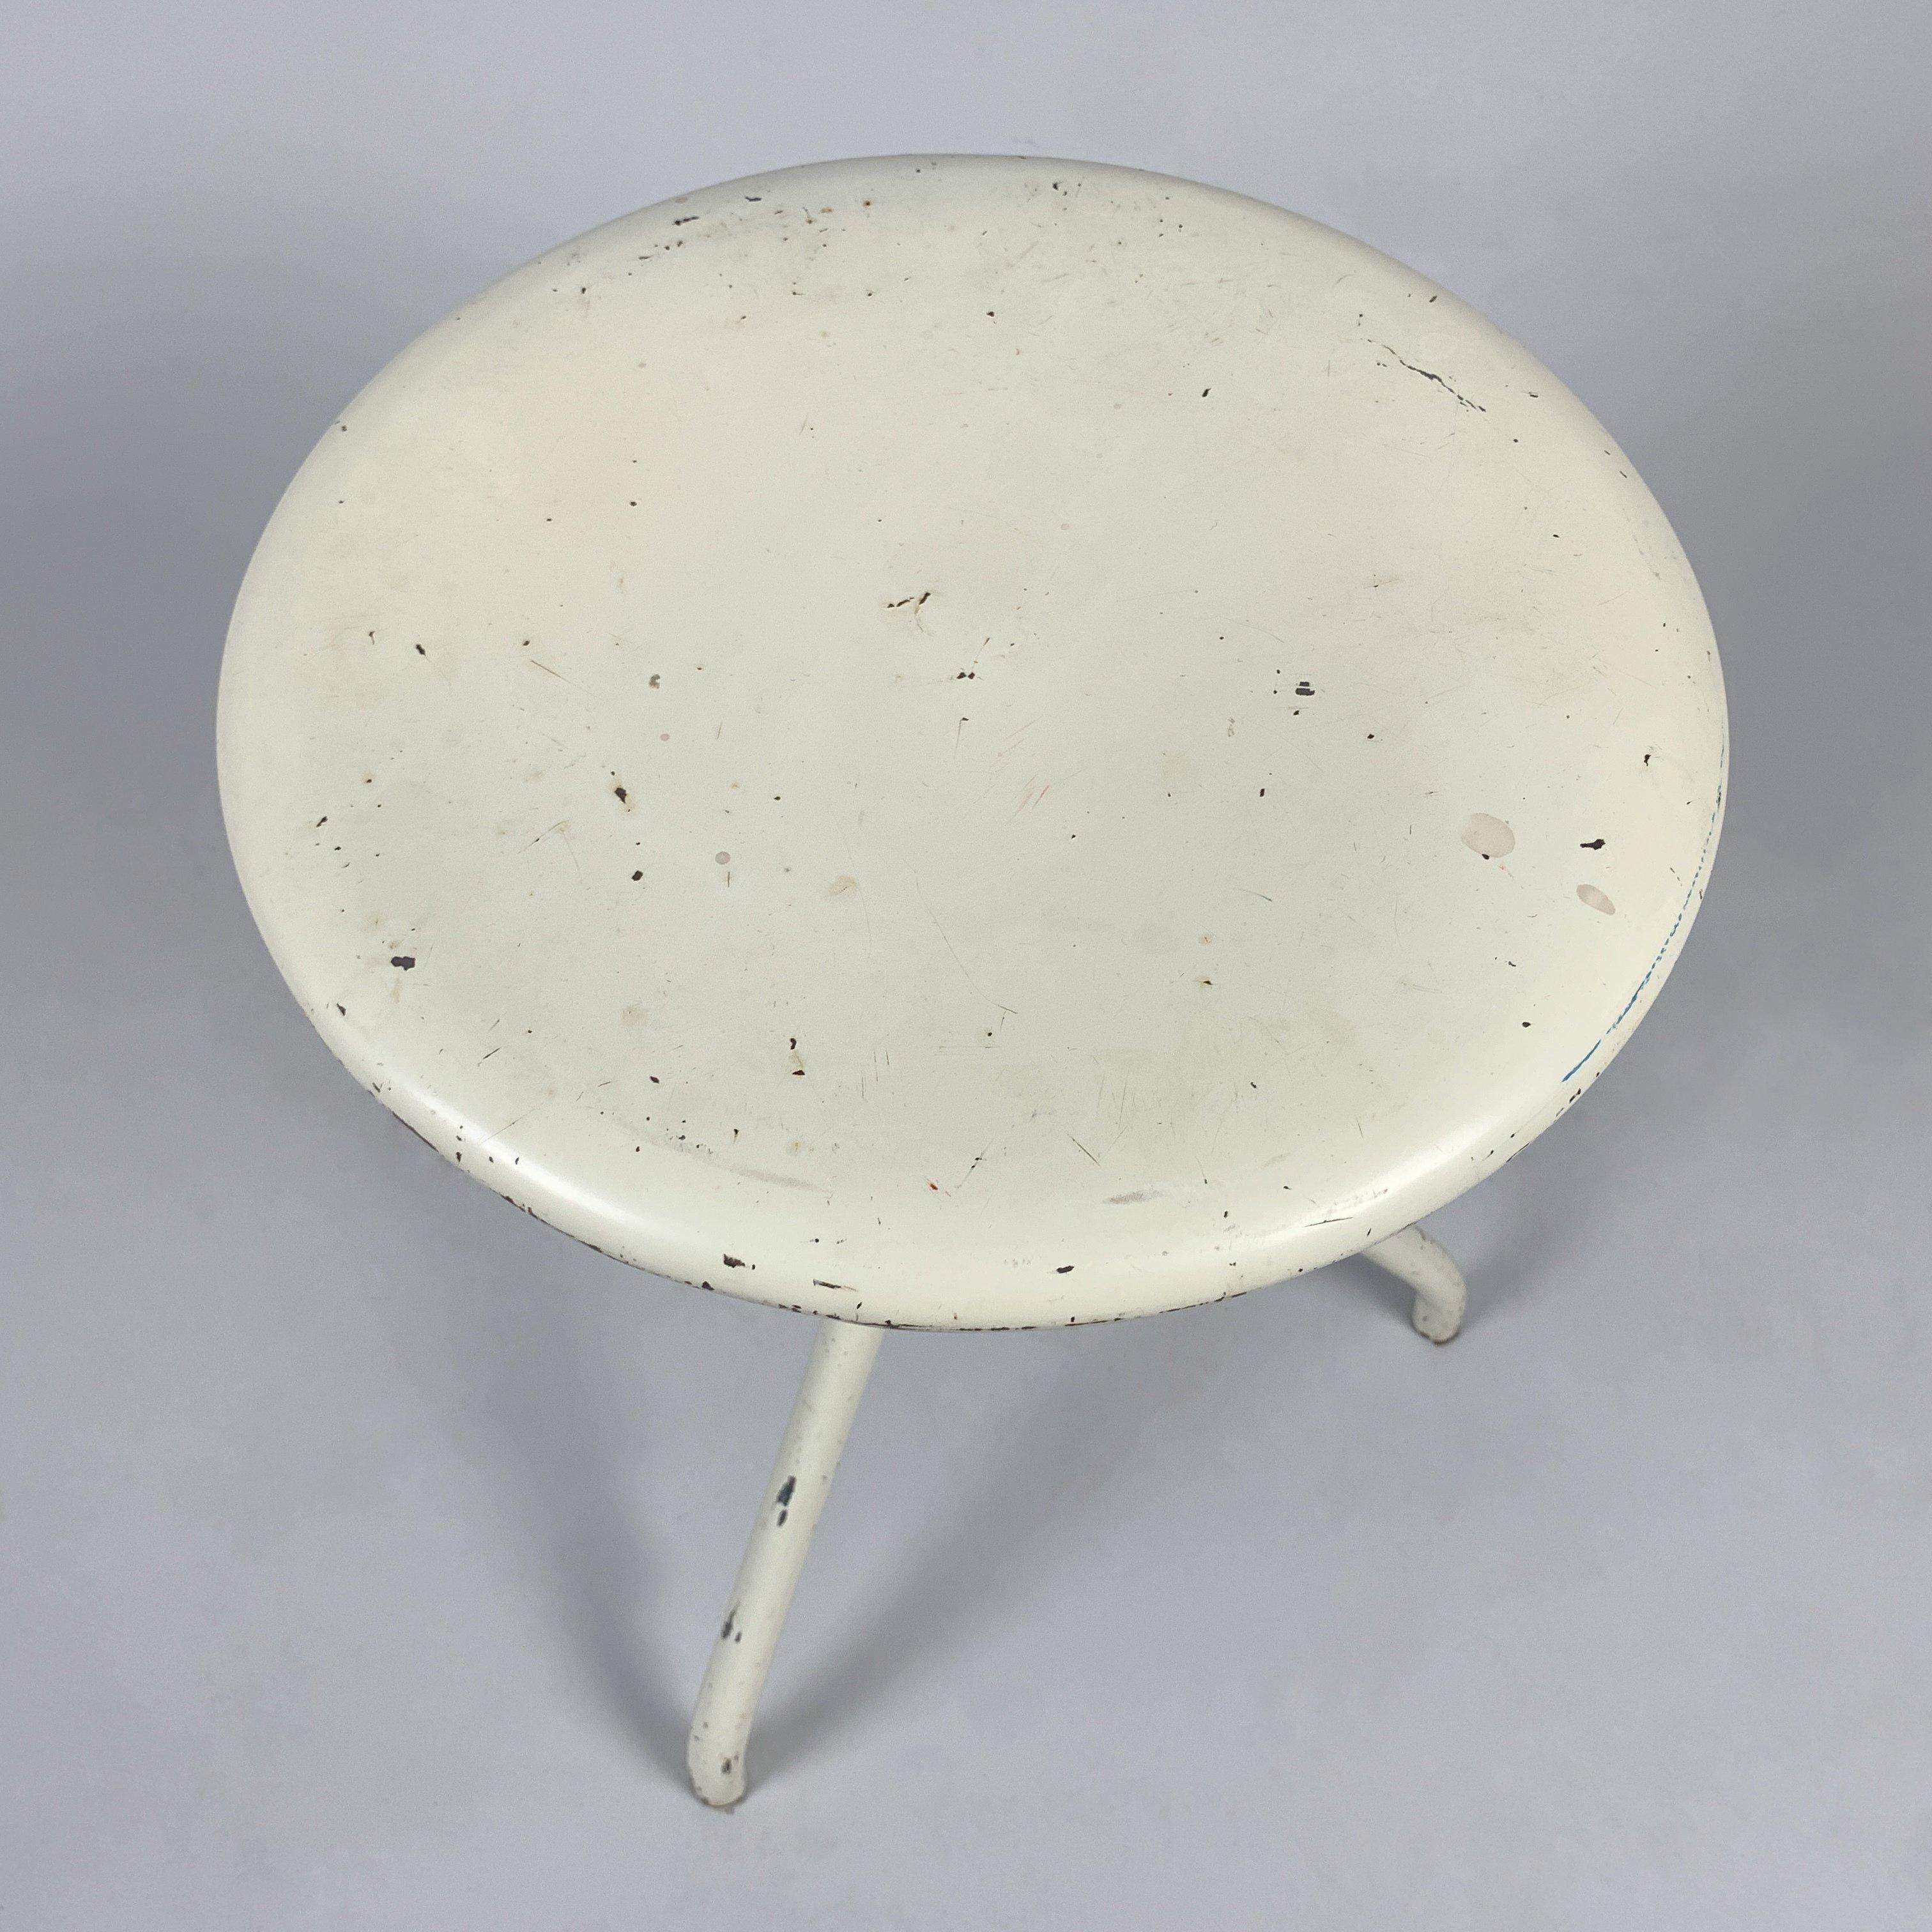 Vintage metal adjustable stool from former Czechoslovakia. Was used in hospitals or doctor's offices. Original condition.